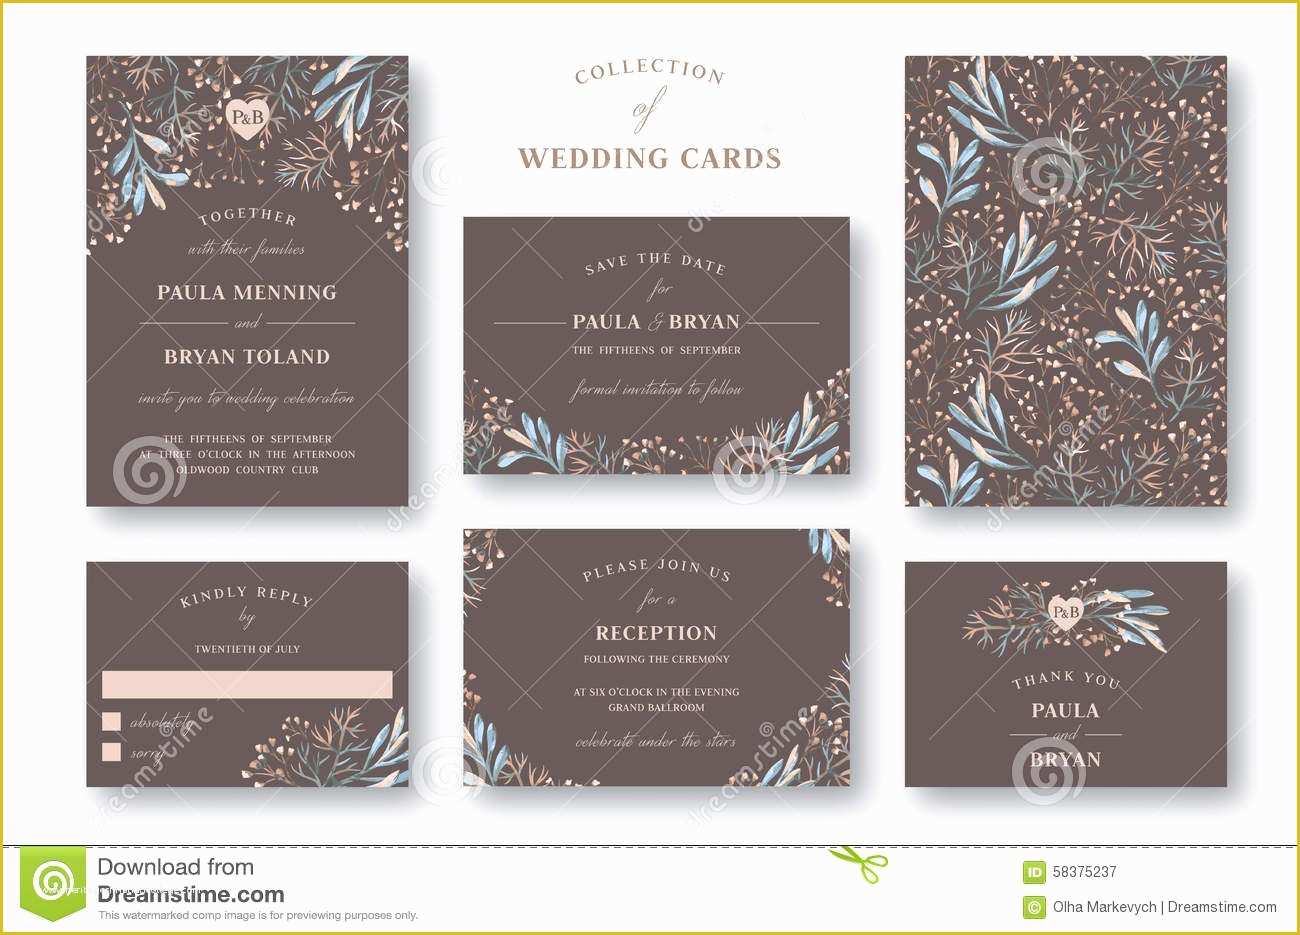 Free Reception Card Template Of Collection Wedding Invitation Stock Vector Image